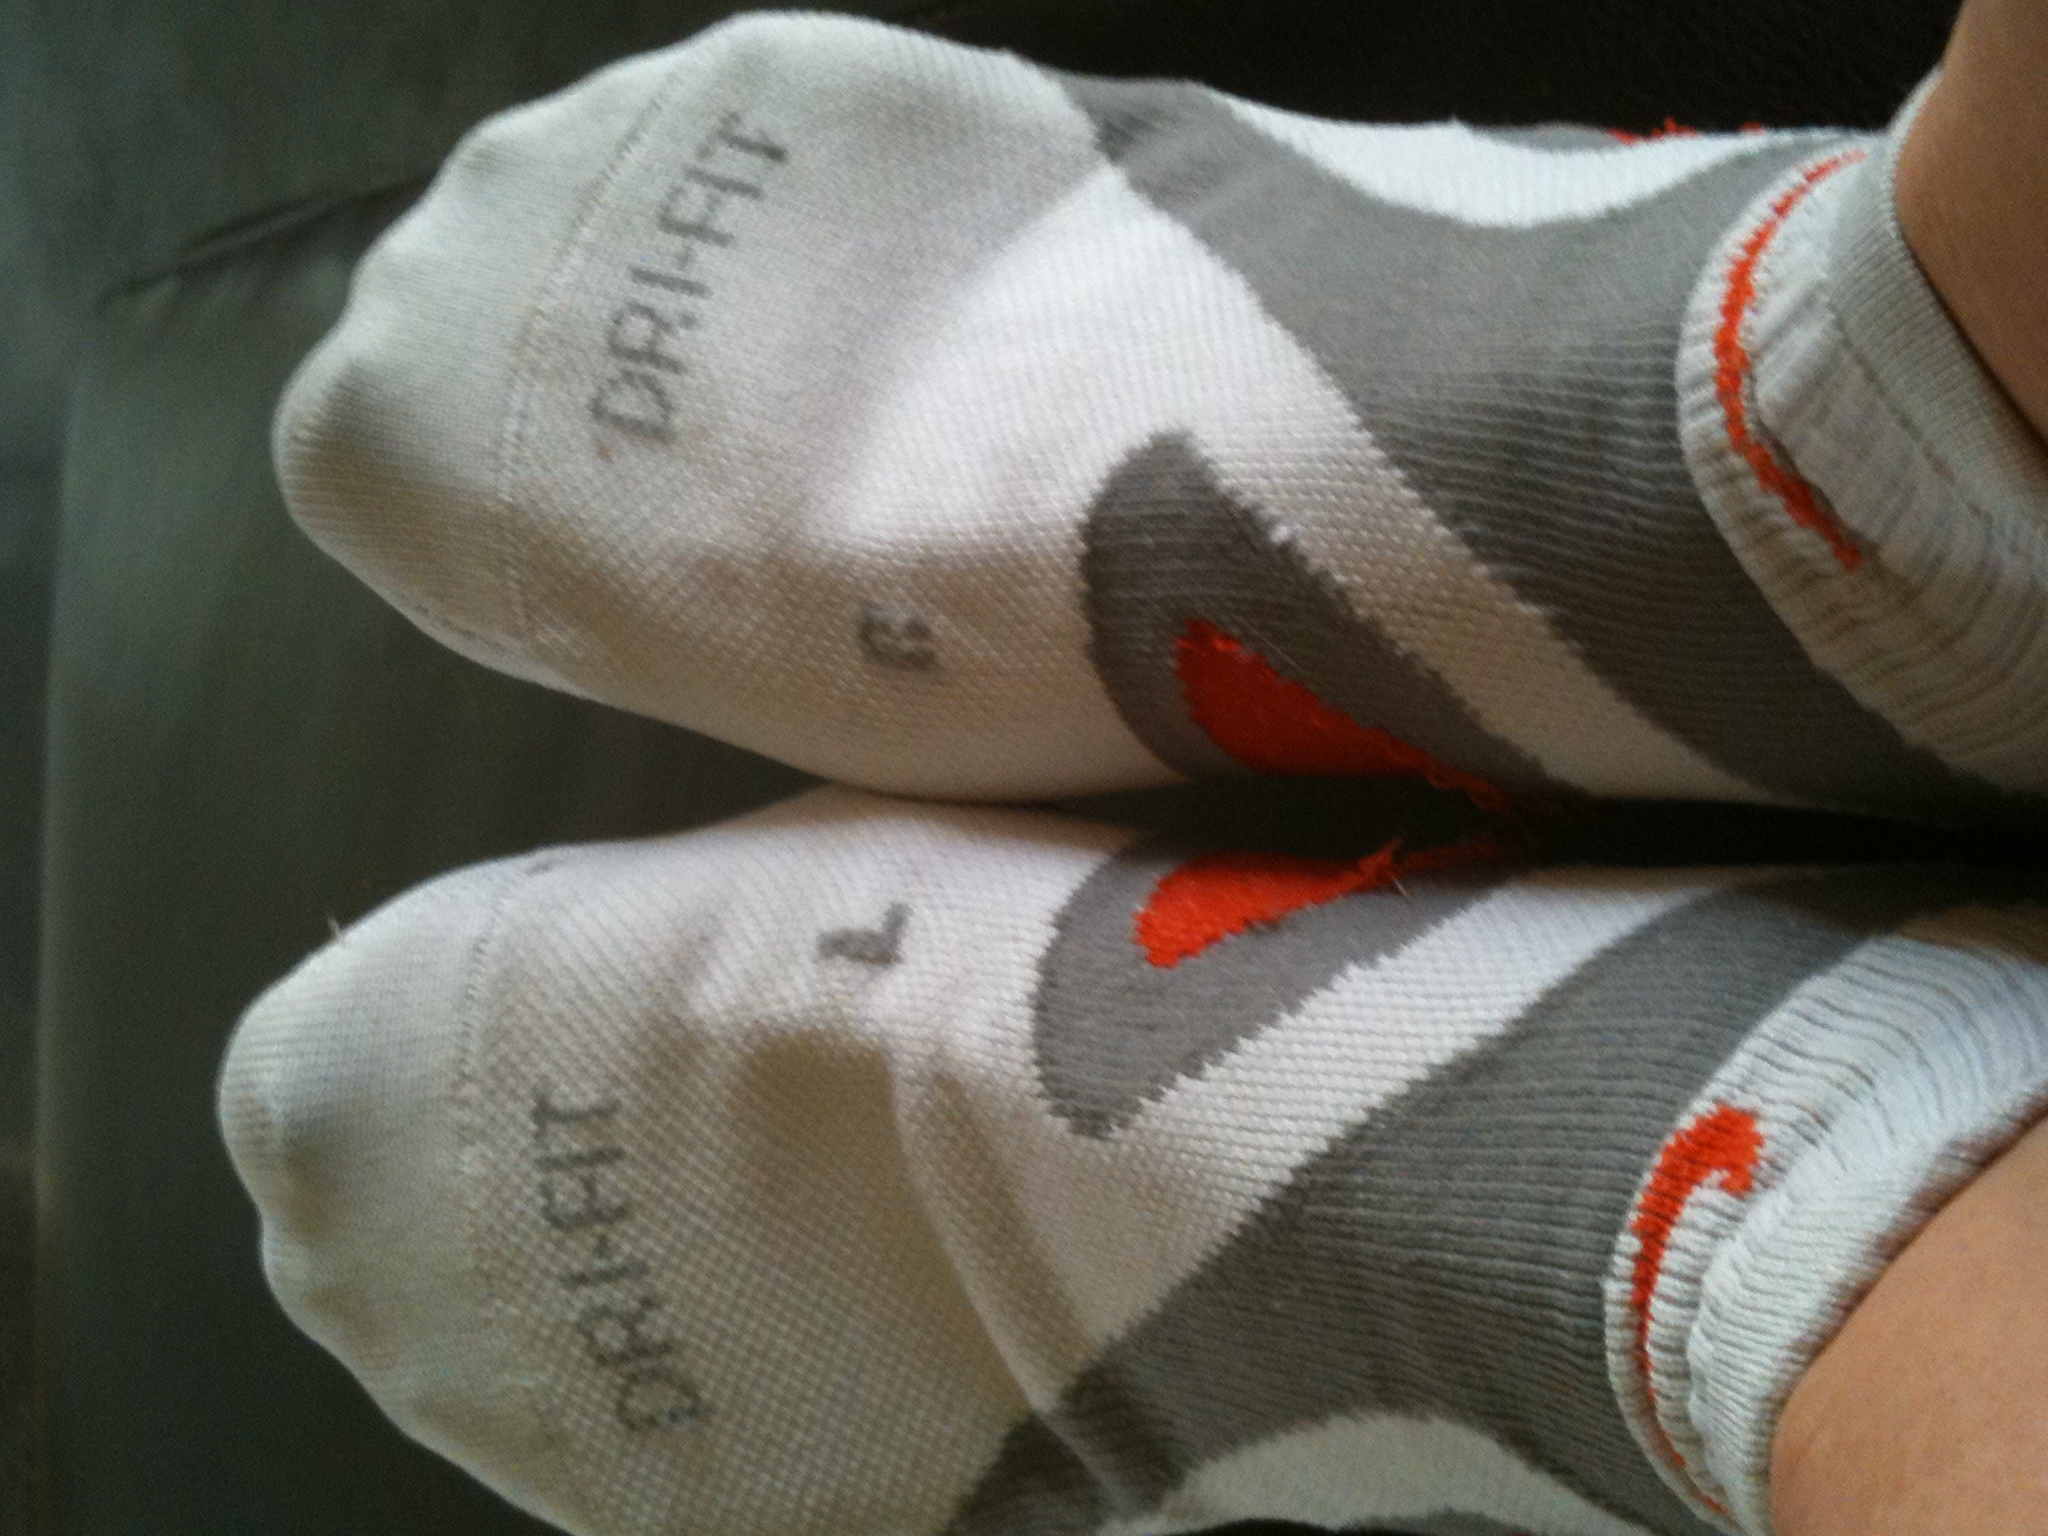 left and right socks nike